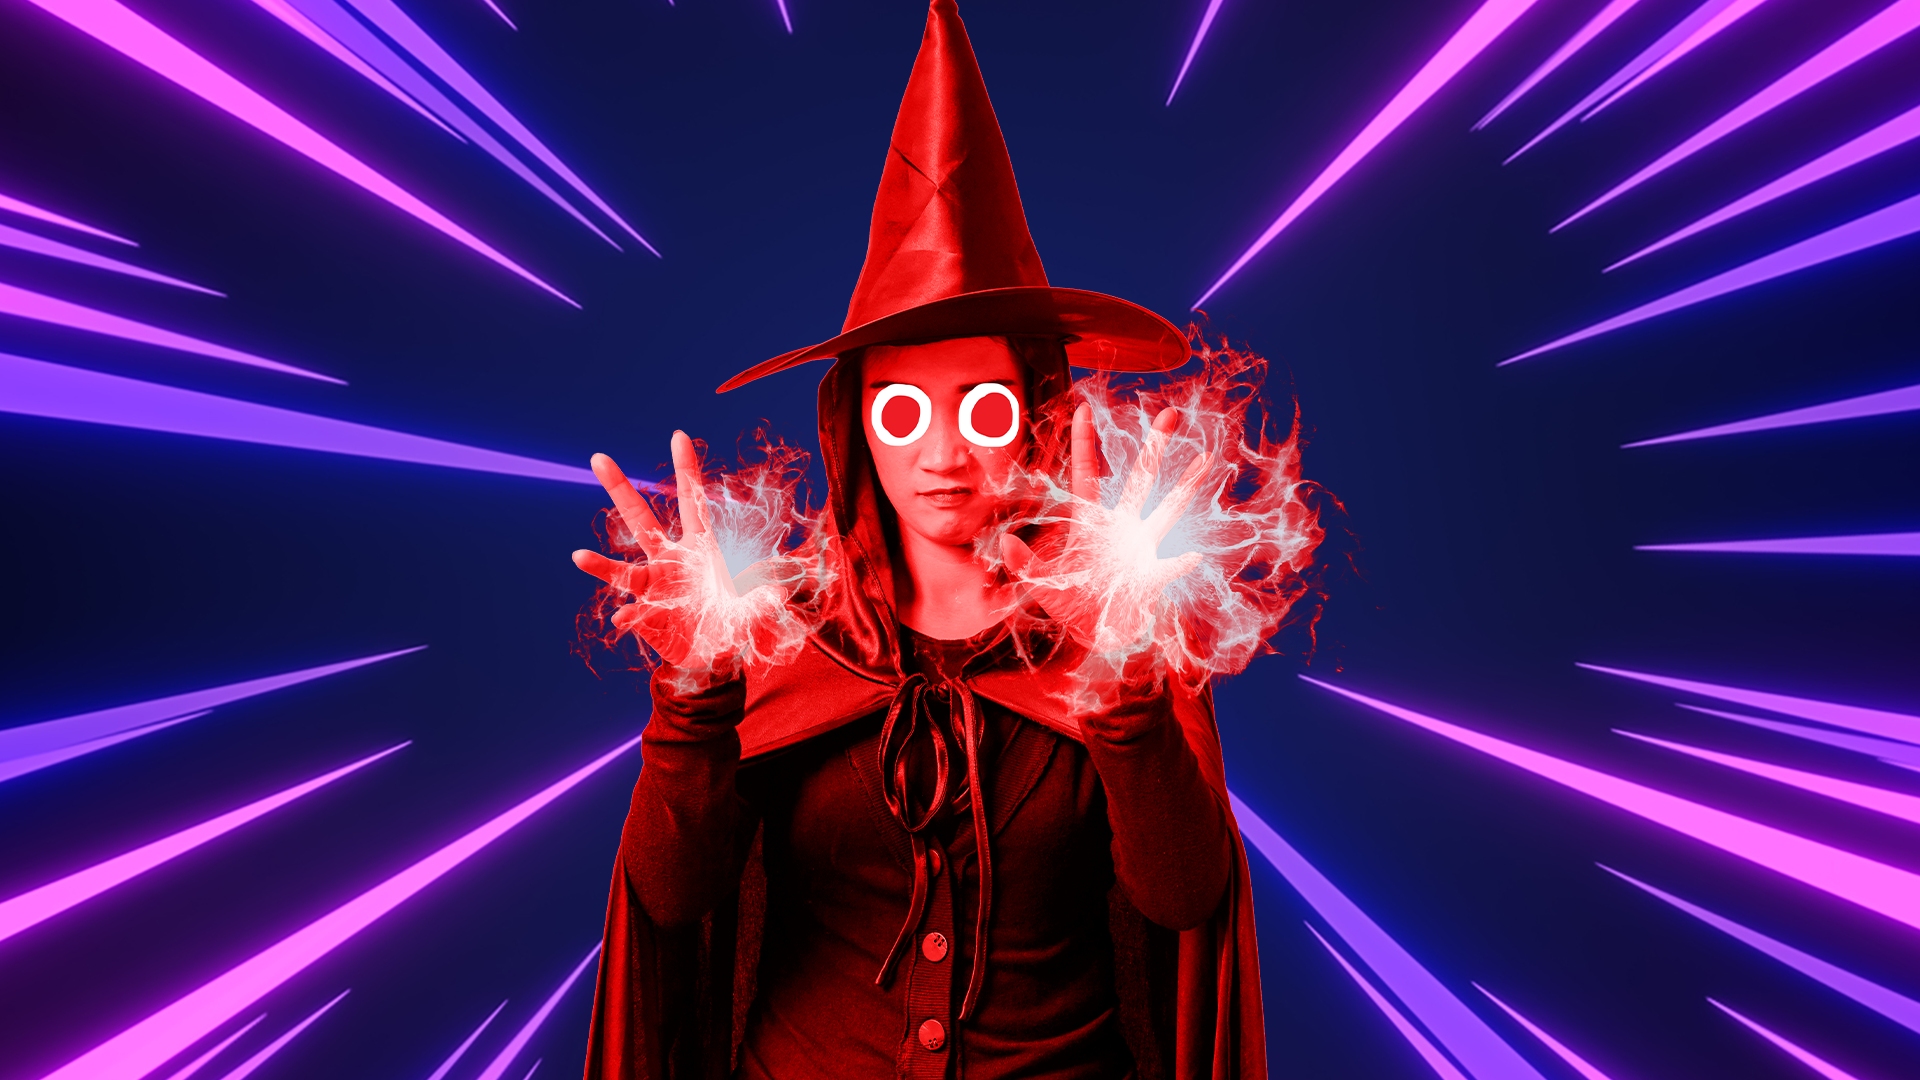 Beano Scarlet Witch on laser background